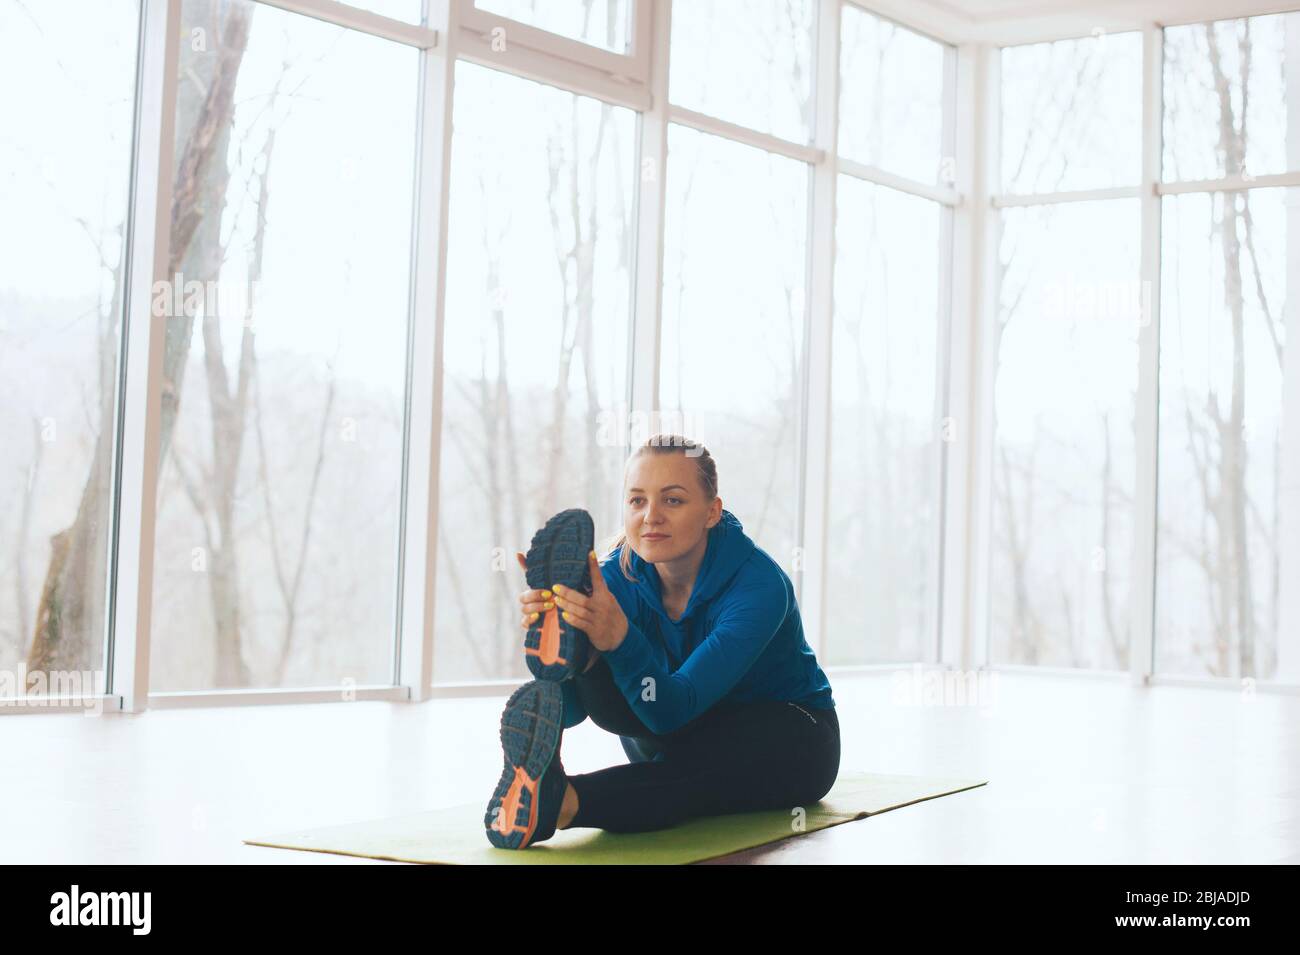 Concentrated woman is doing some stretching on the floor in a room full of light and windows. Stock Photo